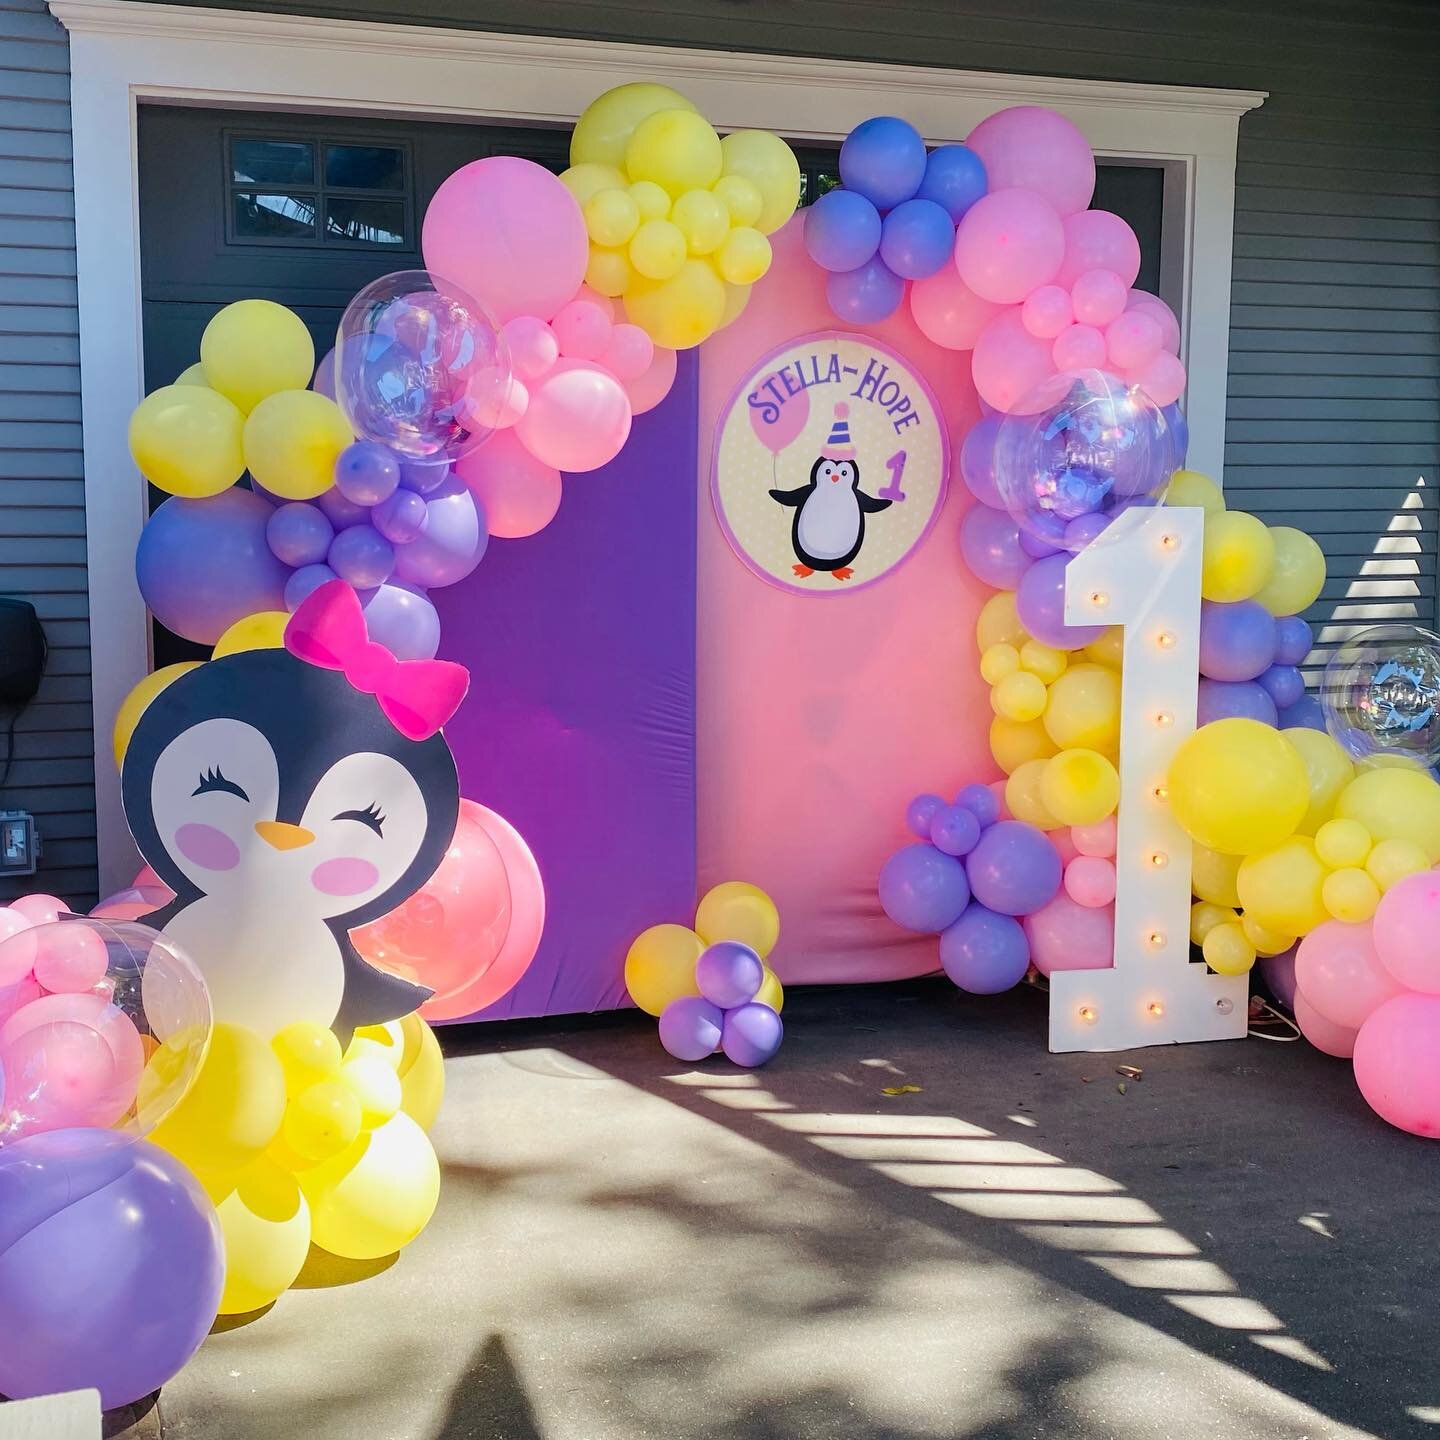 🩷🐧💜Thank you, Houston for a great Saturday!@houstonkidsparties 
.
.
.
Houston! We&rsquo;ve been providing awesome kids party since 2005! Save the date with us! Our services includes: Kid&rsquo;s Table and Chair Decor Balloon &amp; Backdrops Soft P